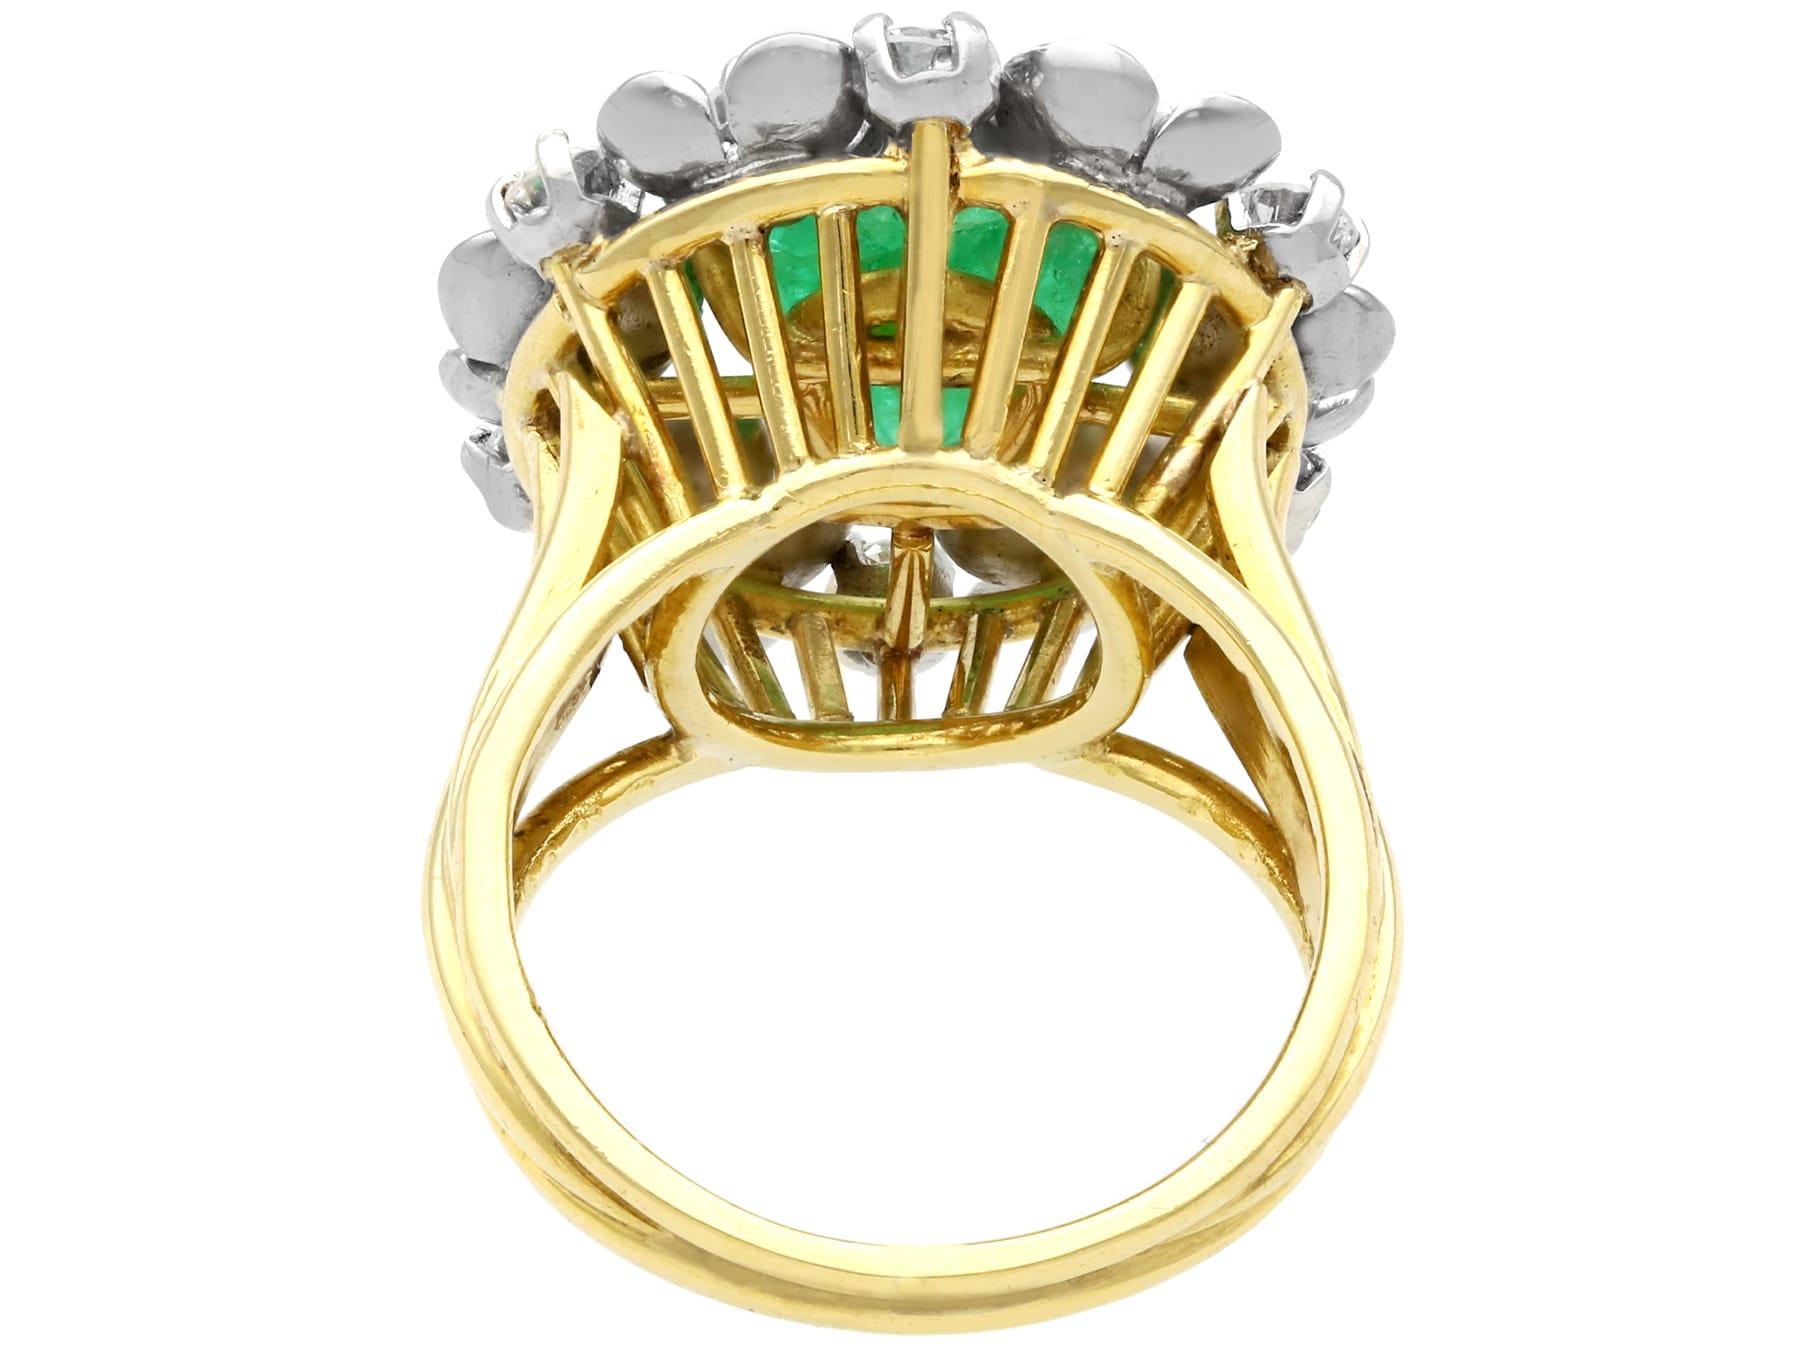 Antique 1920s 2.42 Carat Emerald Diamond Gold Cocktail Cluster Ring In Excellent Condition For Sale In Jesmond, Newcastle Upon Tyne